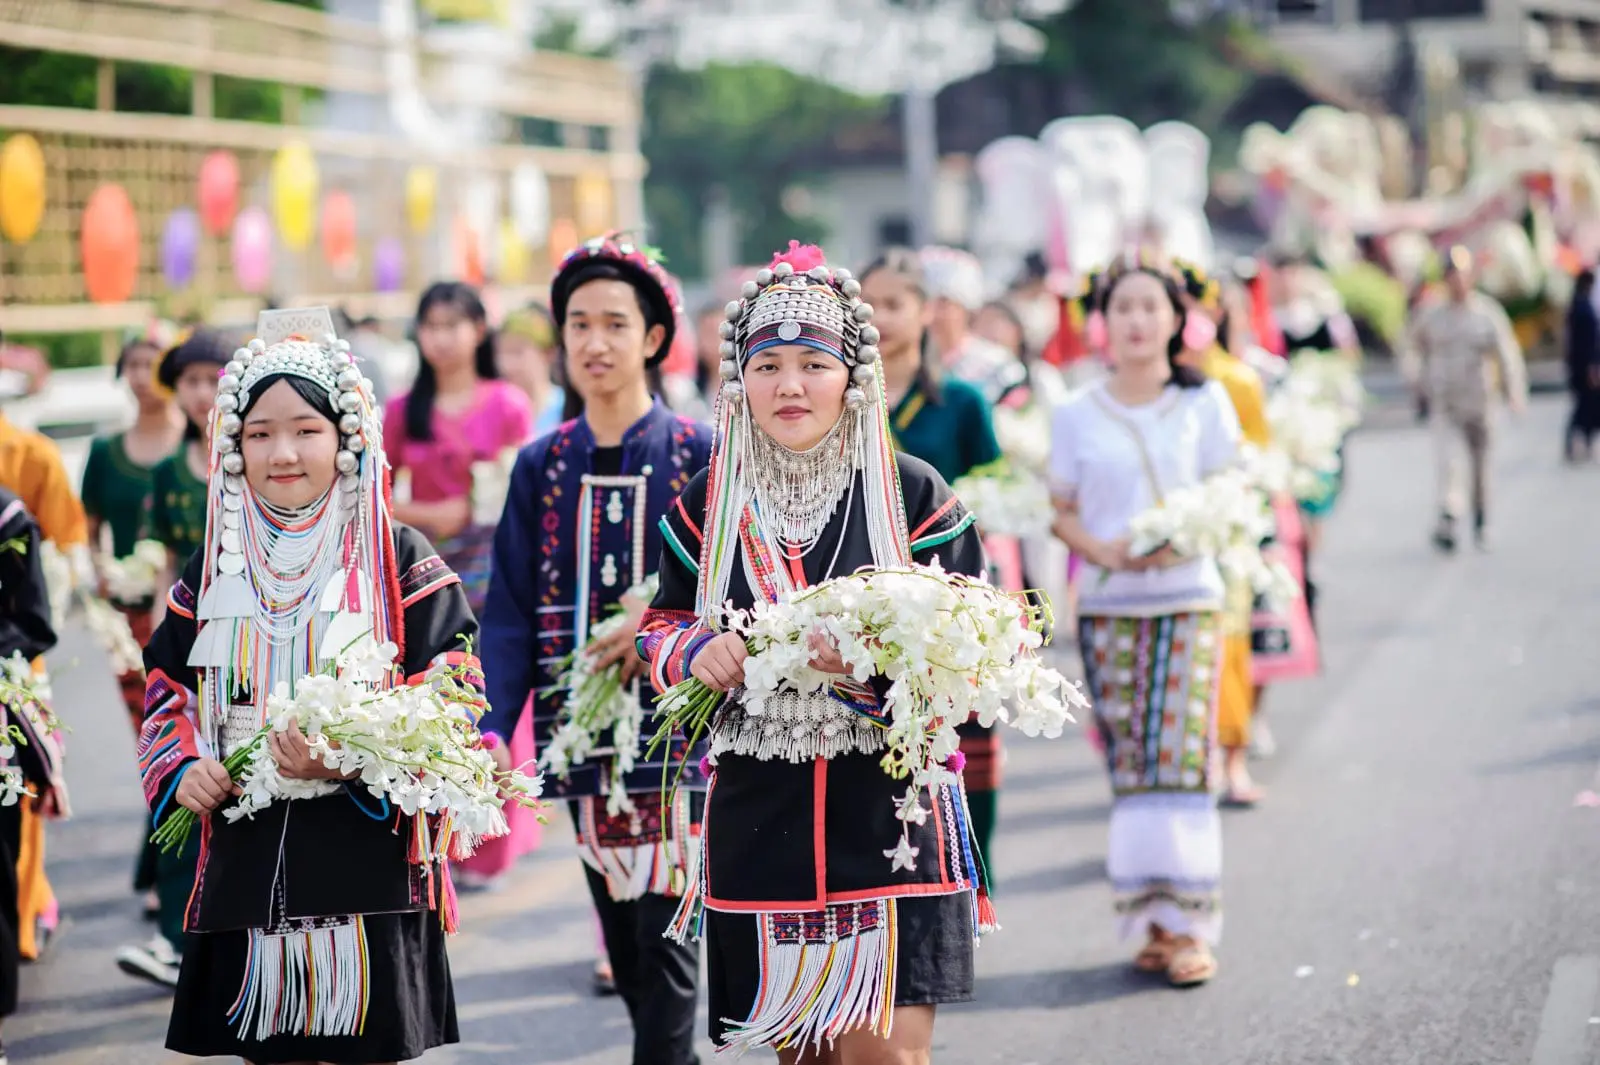 Chiang Mai Flower Festival 2022 in Thailand - Travel Begins at 40